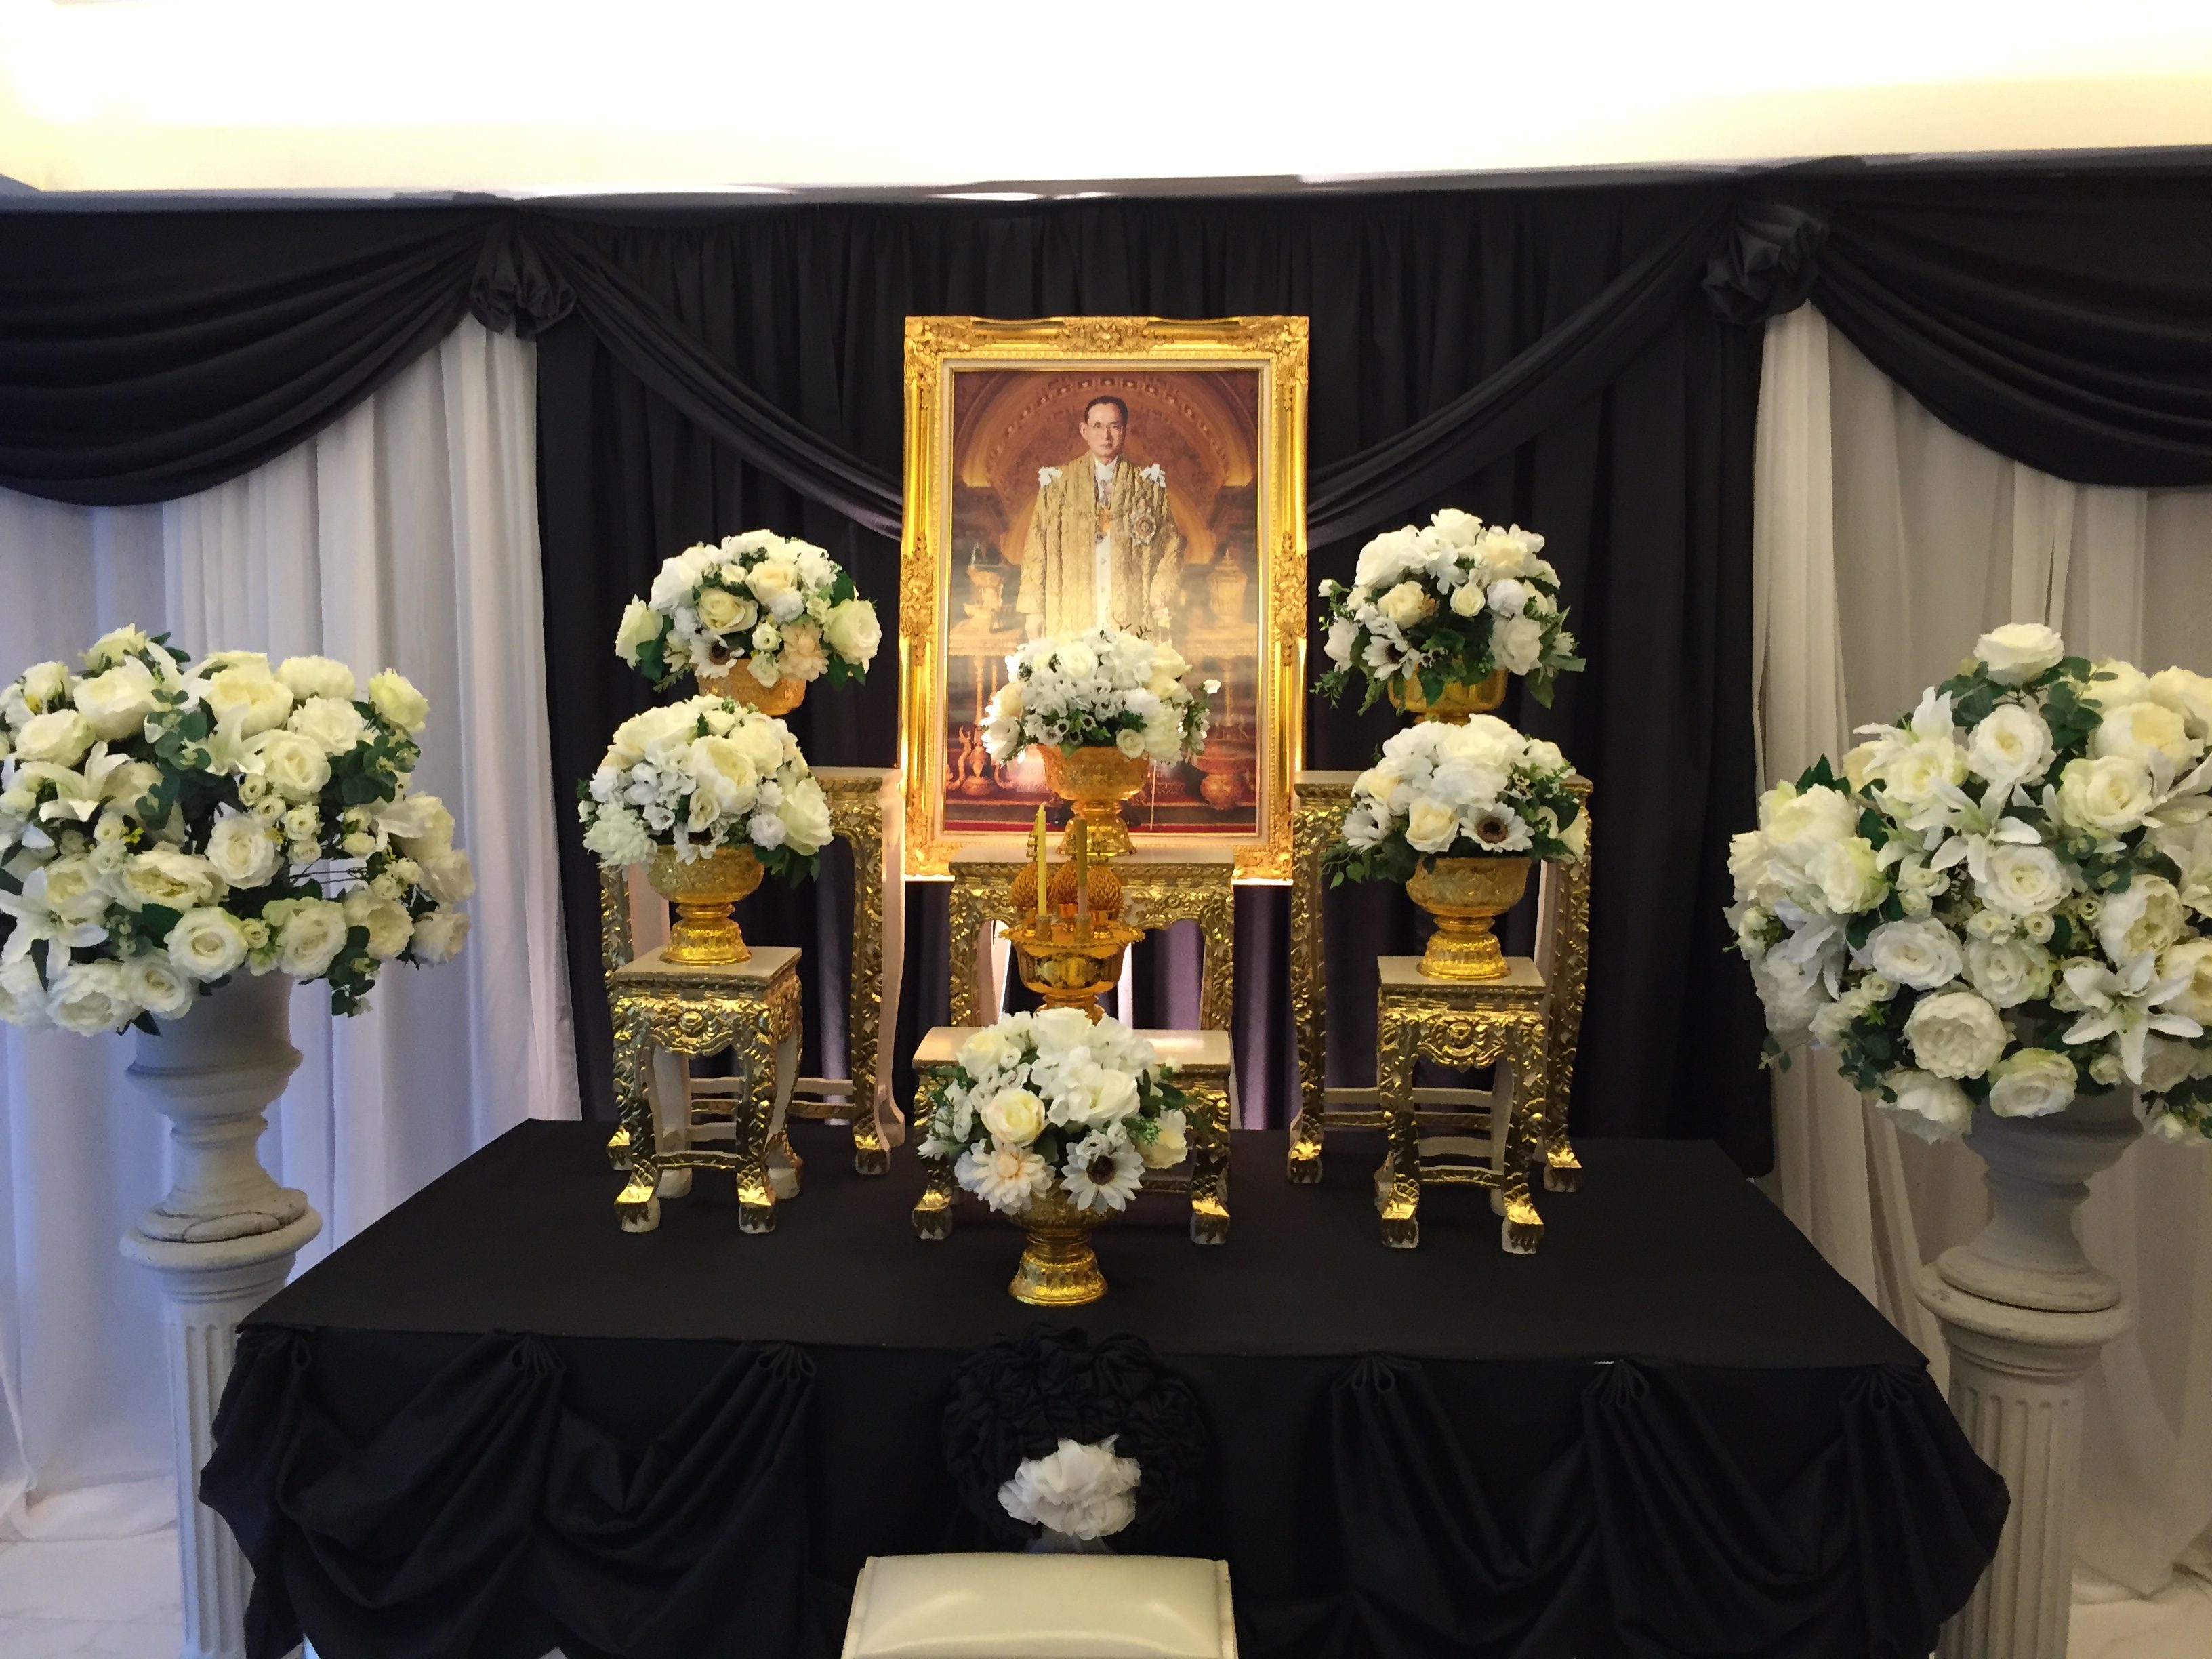 Tributes and alters to the late King can be seen all over Thailand as they mourn.